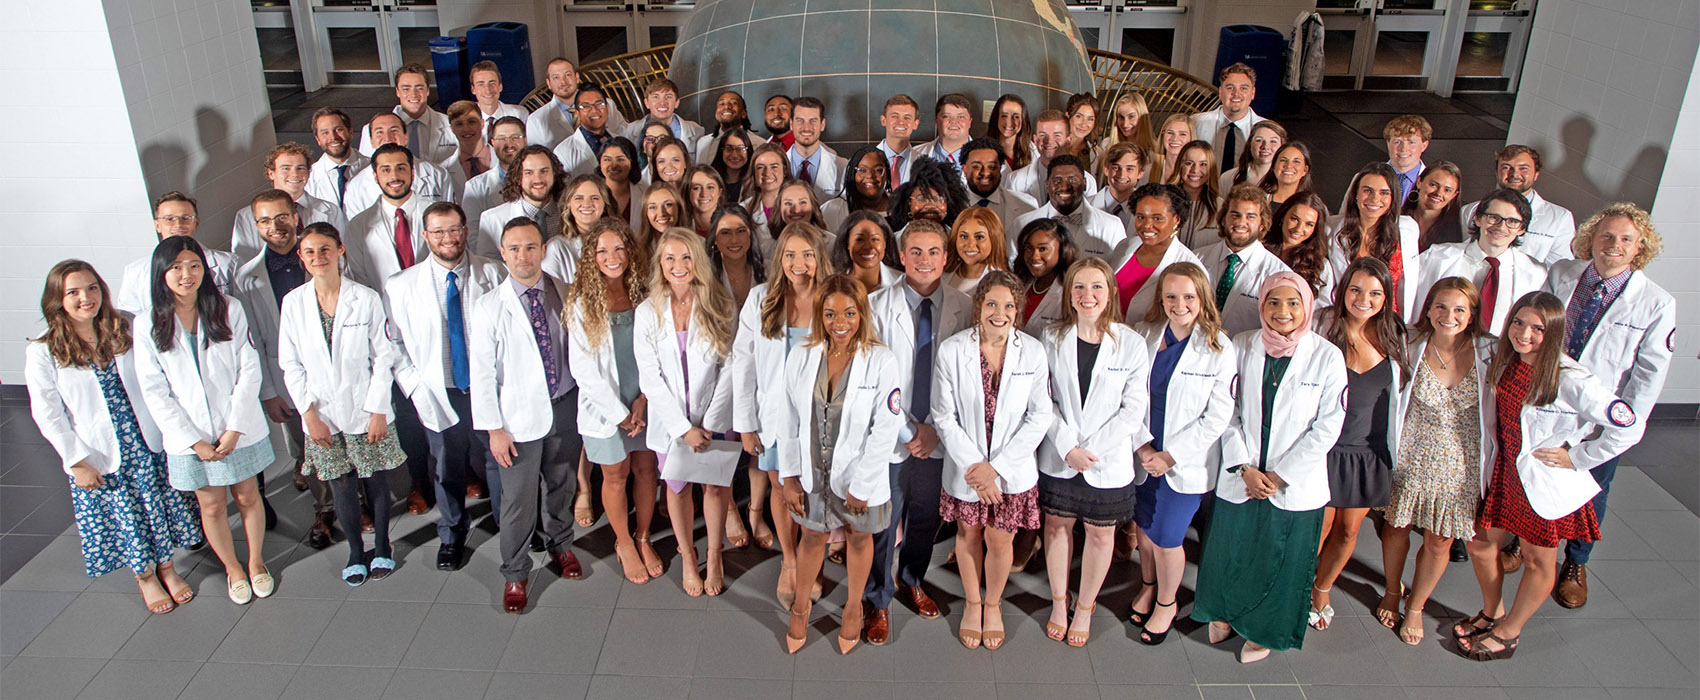 The White Coat Ceremony for the Class of 2024